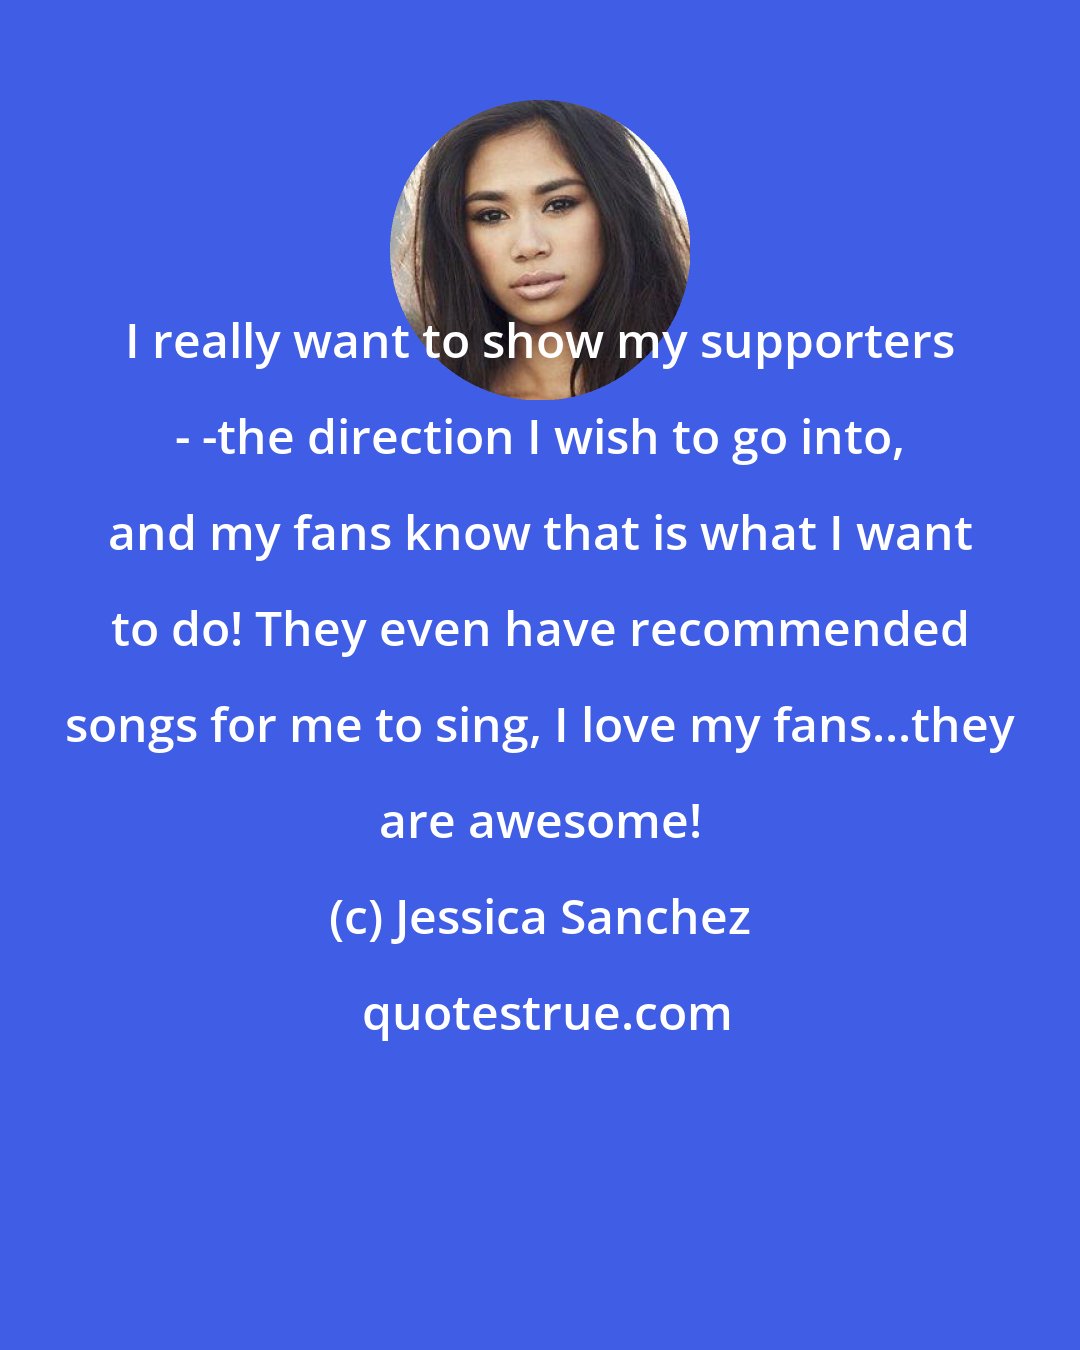 Jessica Sanchez: I really want to show my supporters - -the direction I wish to go into, and my fans know that is what I want to do! They even have recommended songs for me to sing, I love my fans...they are awesome!